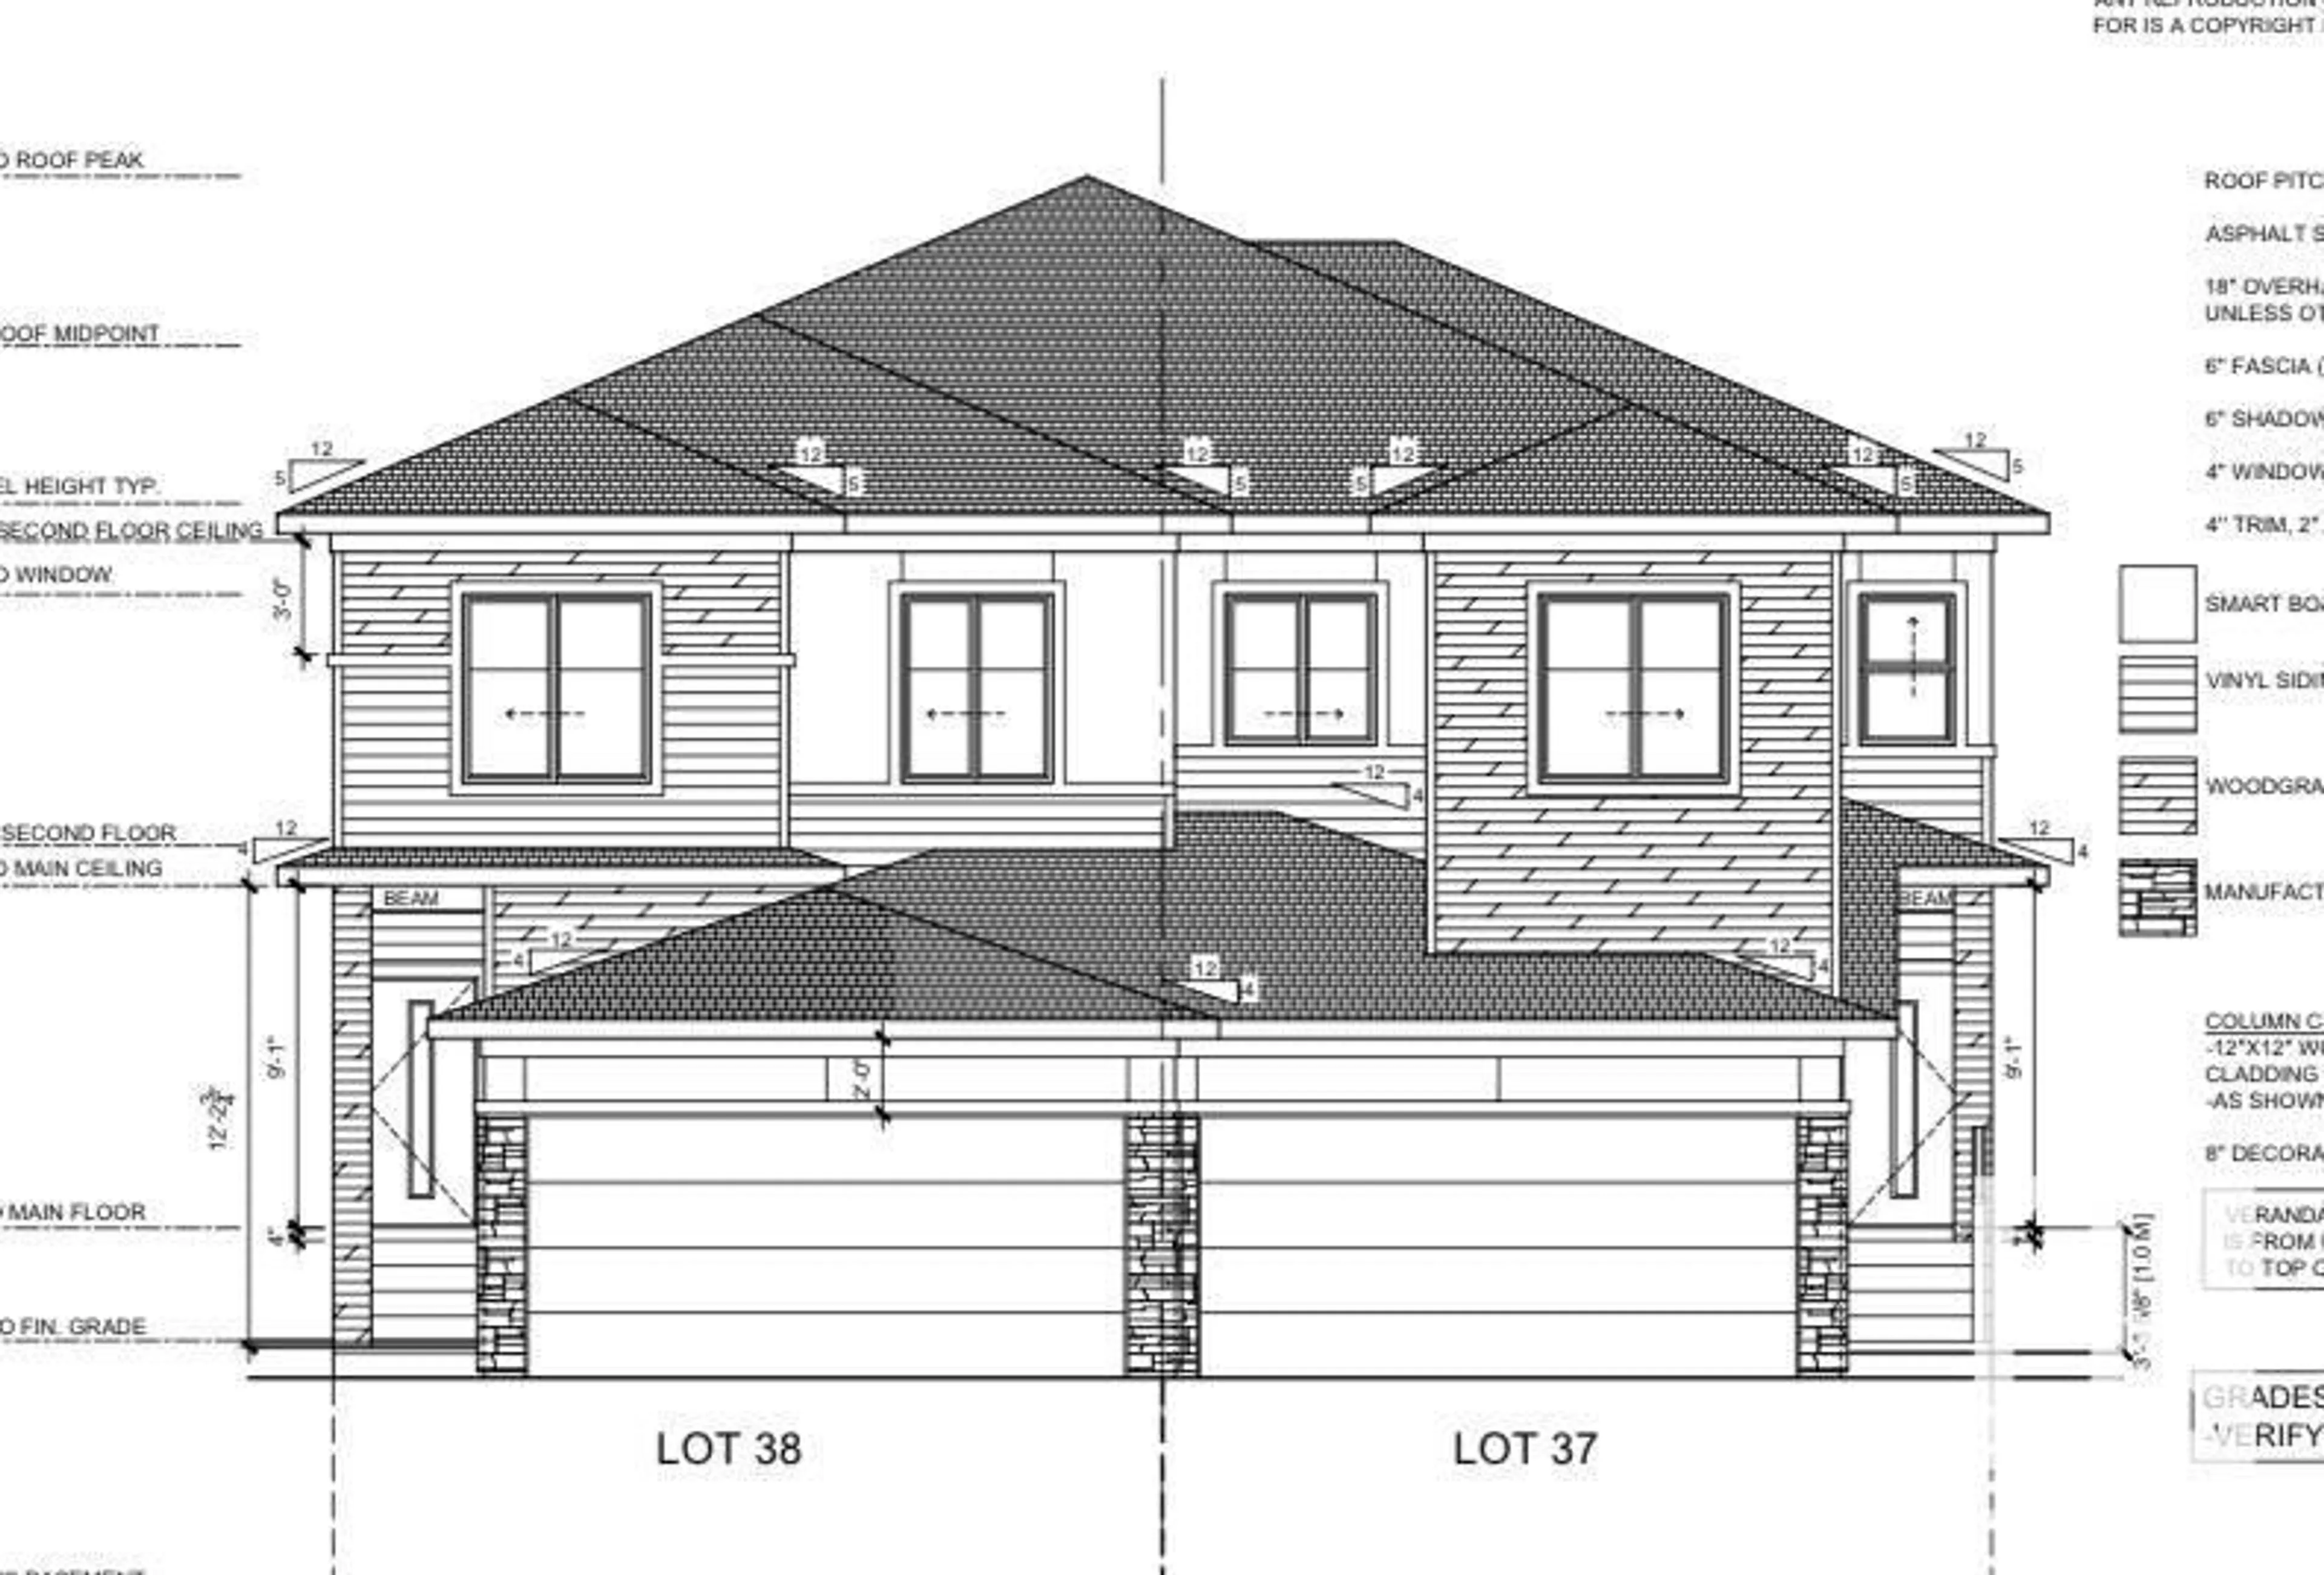 Frontside or backside of a home for 9 TENOR LI, Spruce Grove Alberta T7X3G1